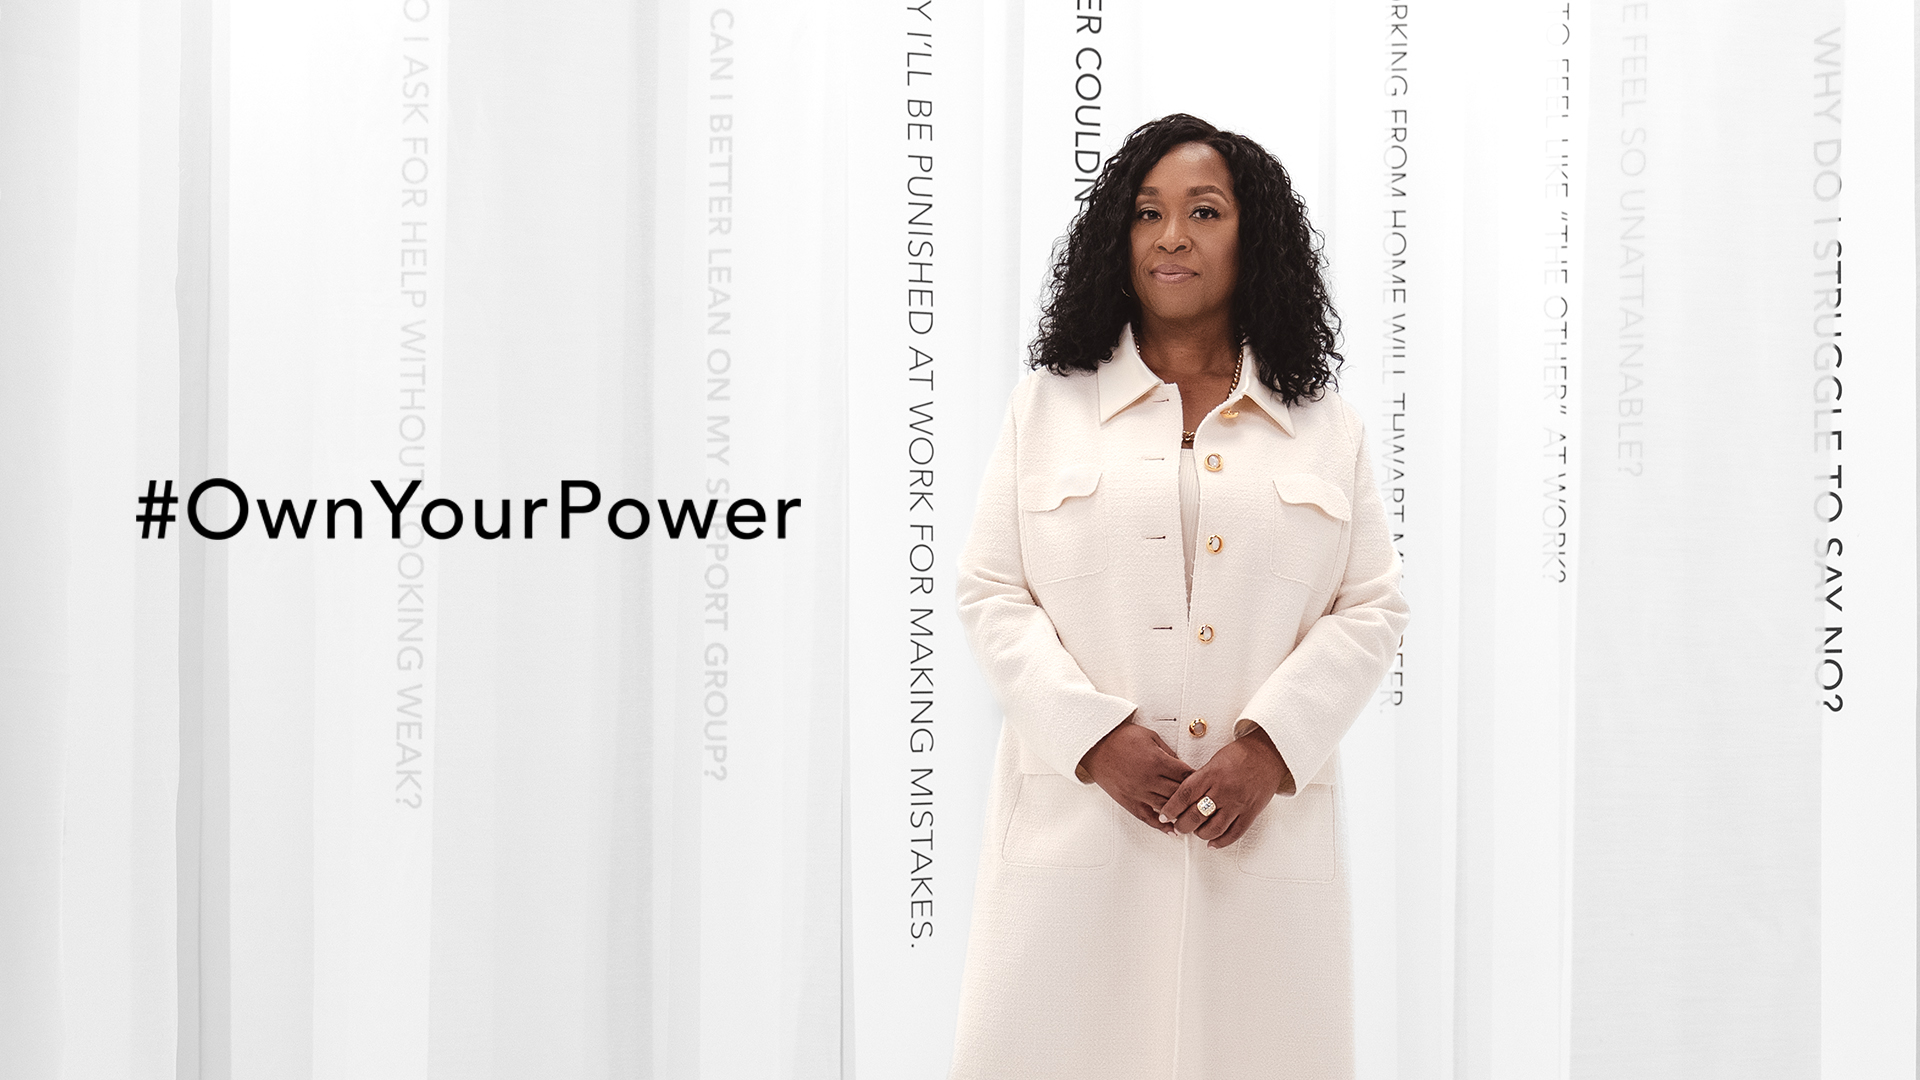 Own your power